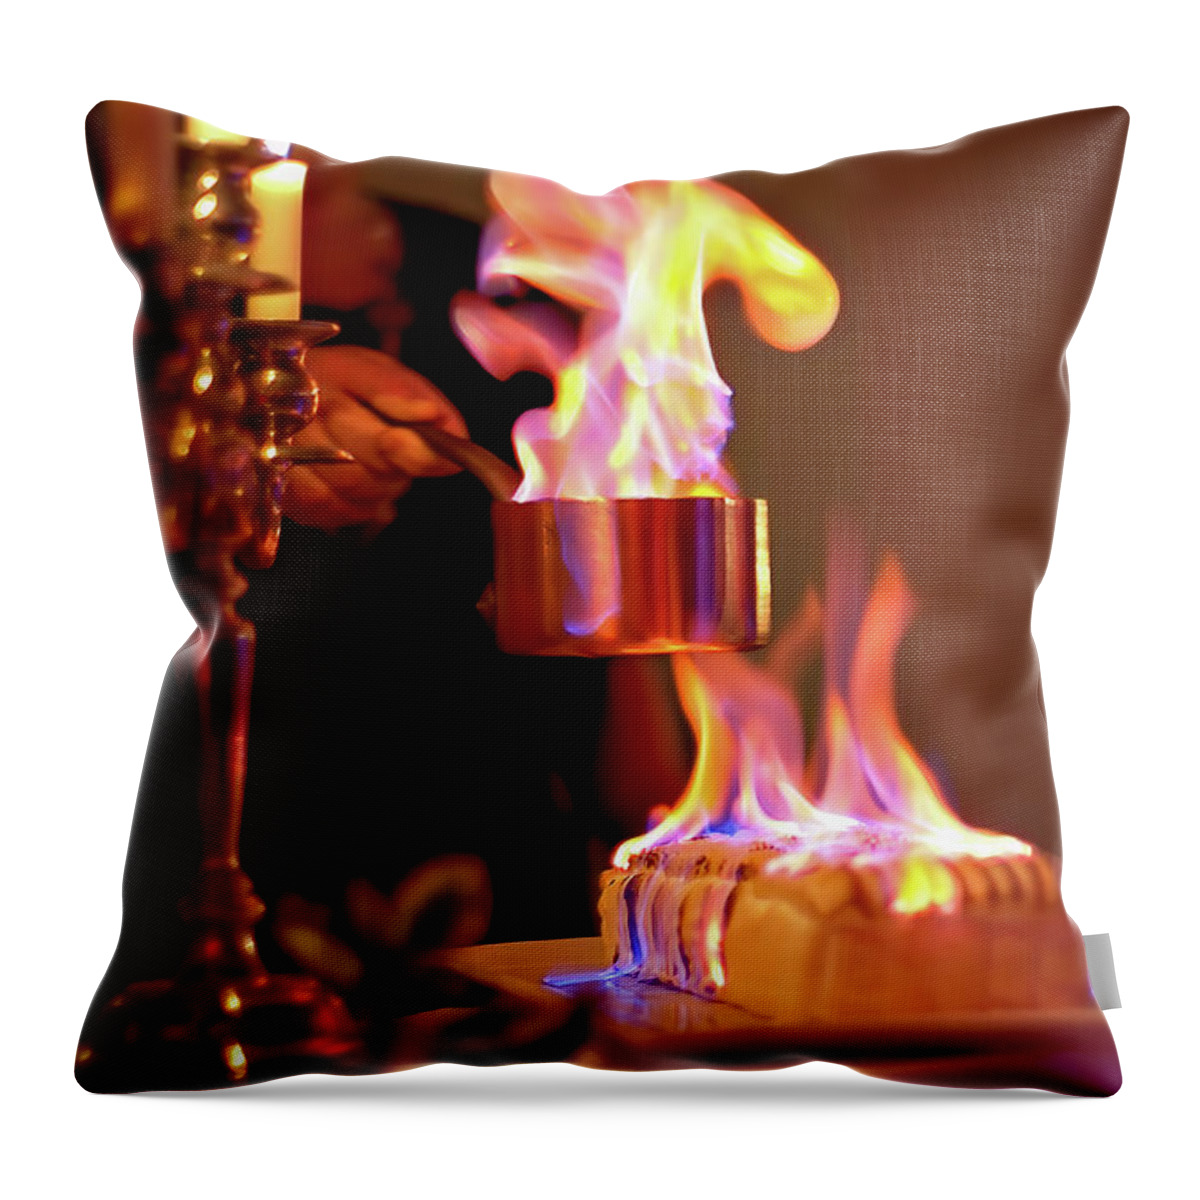 Alcohol Throw Pillow featuring the photograph Flambeed Norwegian omelet, Baked Alaska by Jean-Luc Farges